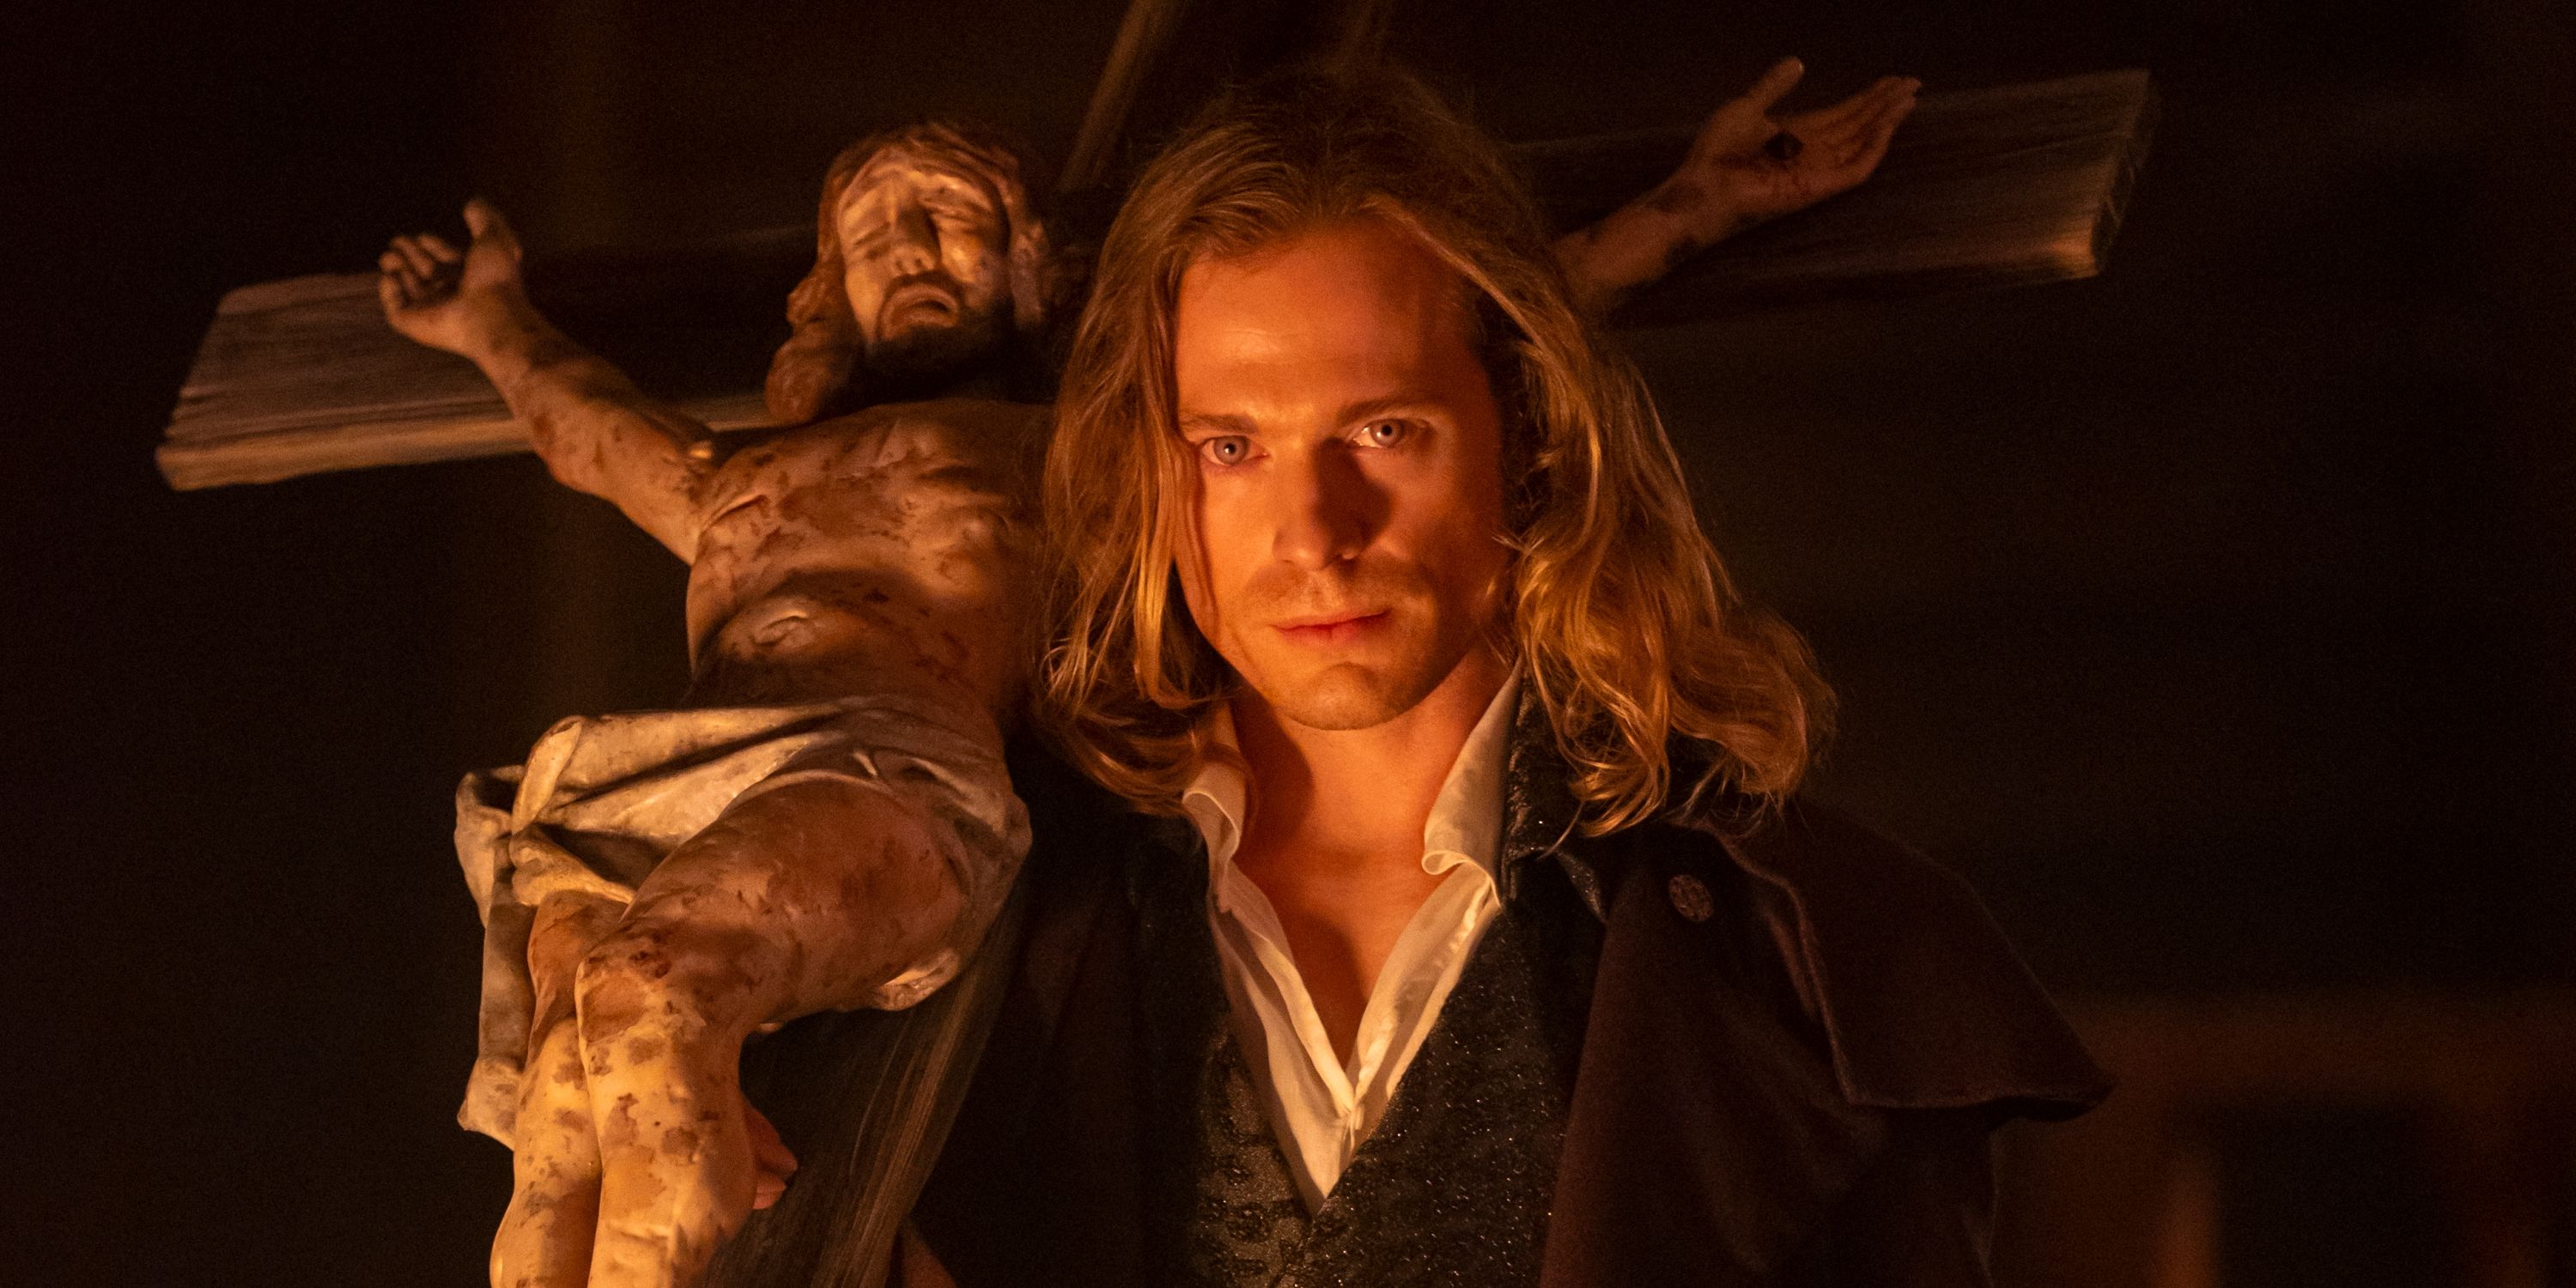 Sam Reid as Lestat carrying a cross with Jesus in an AMC promo gallery of the second season of Interview with the Vampire